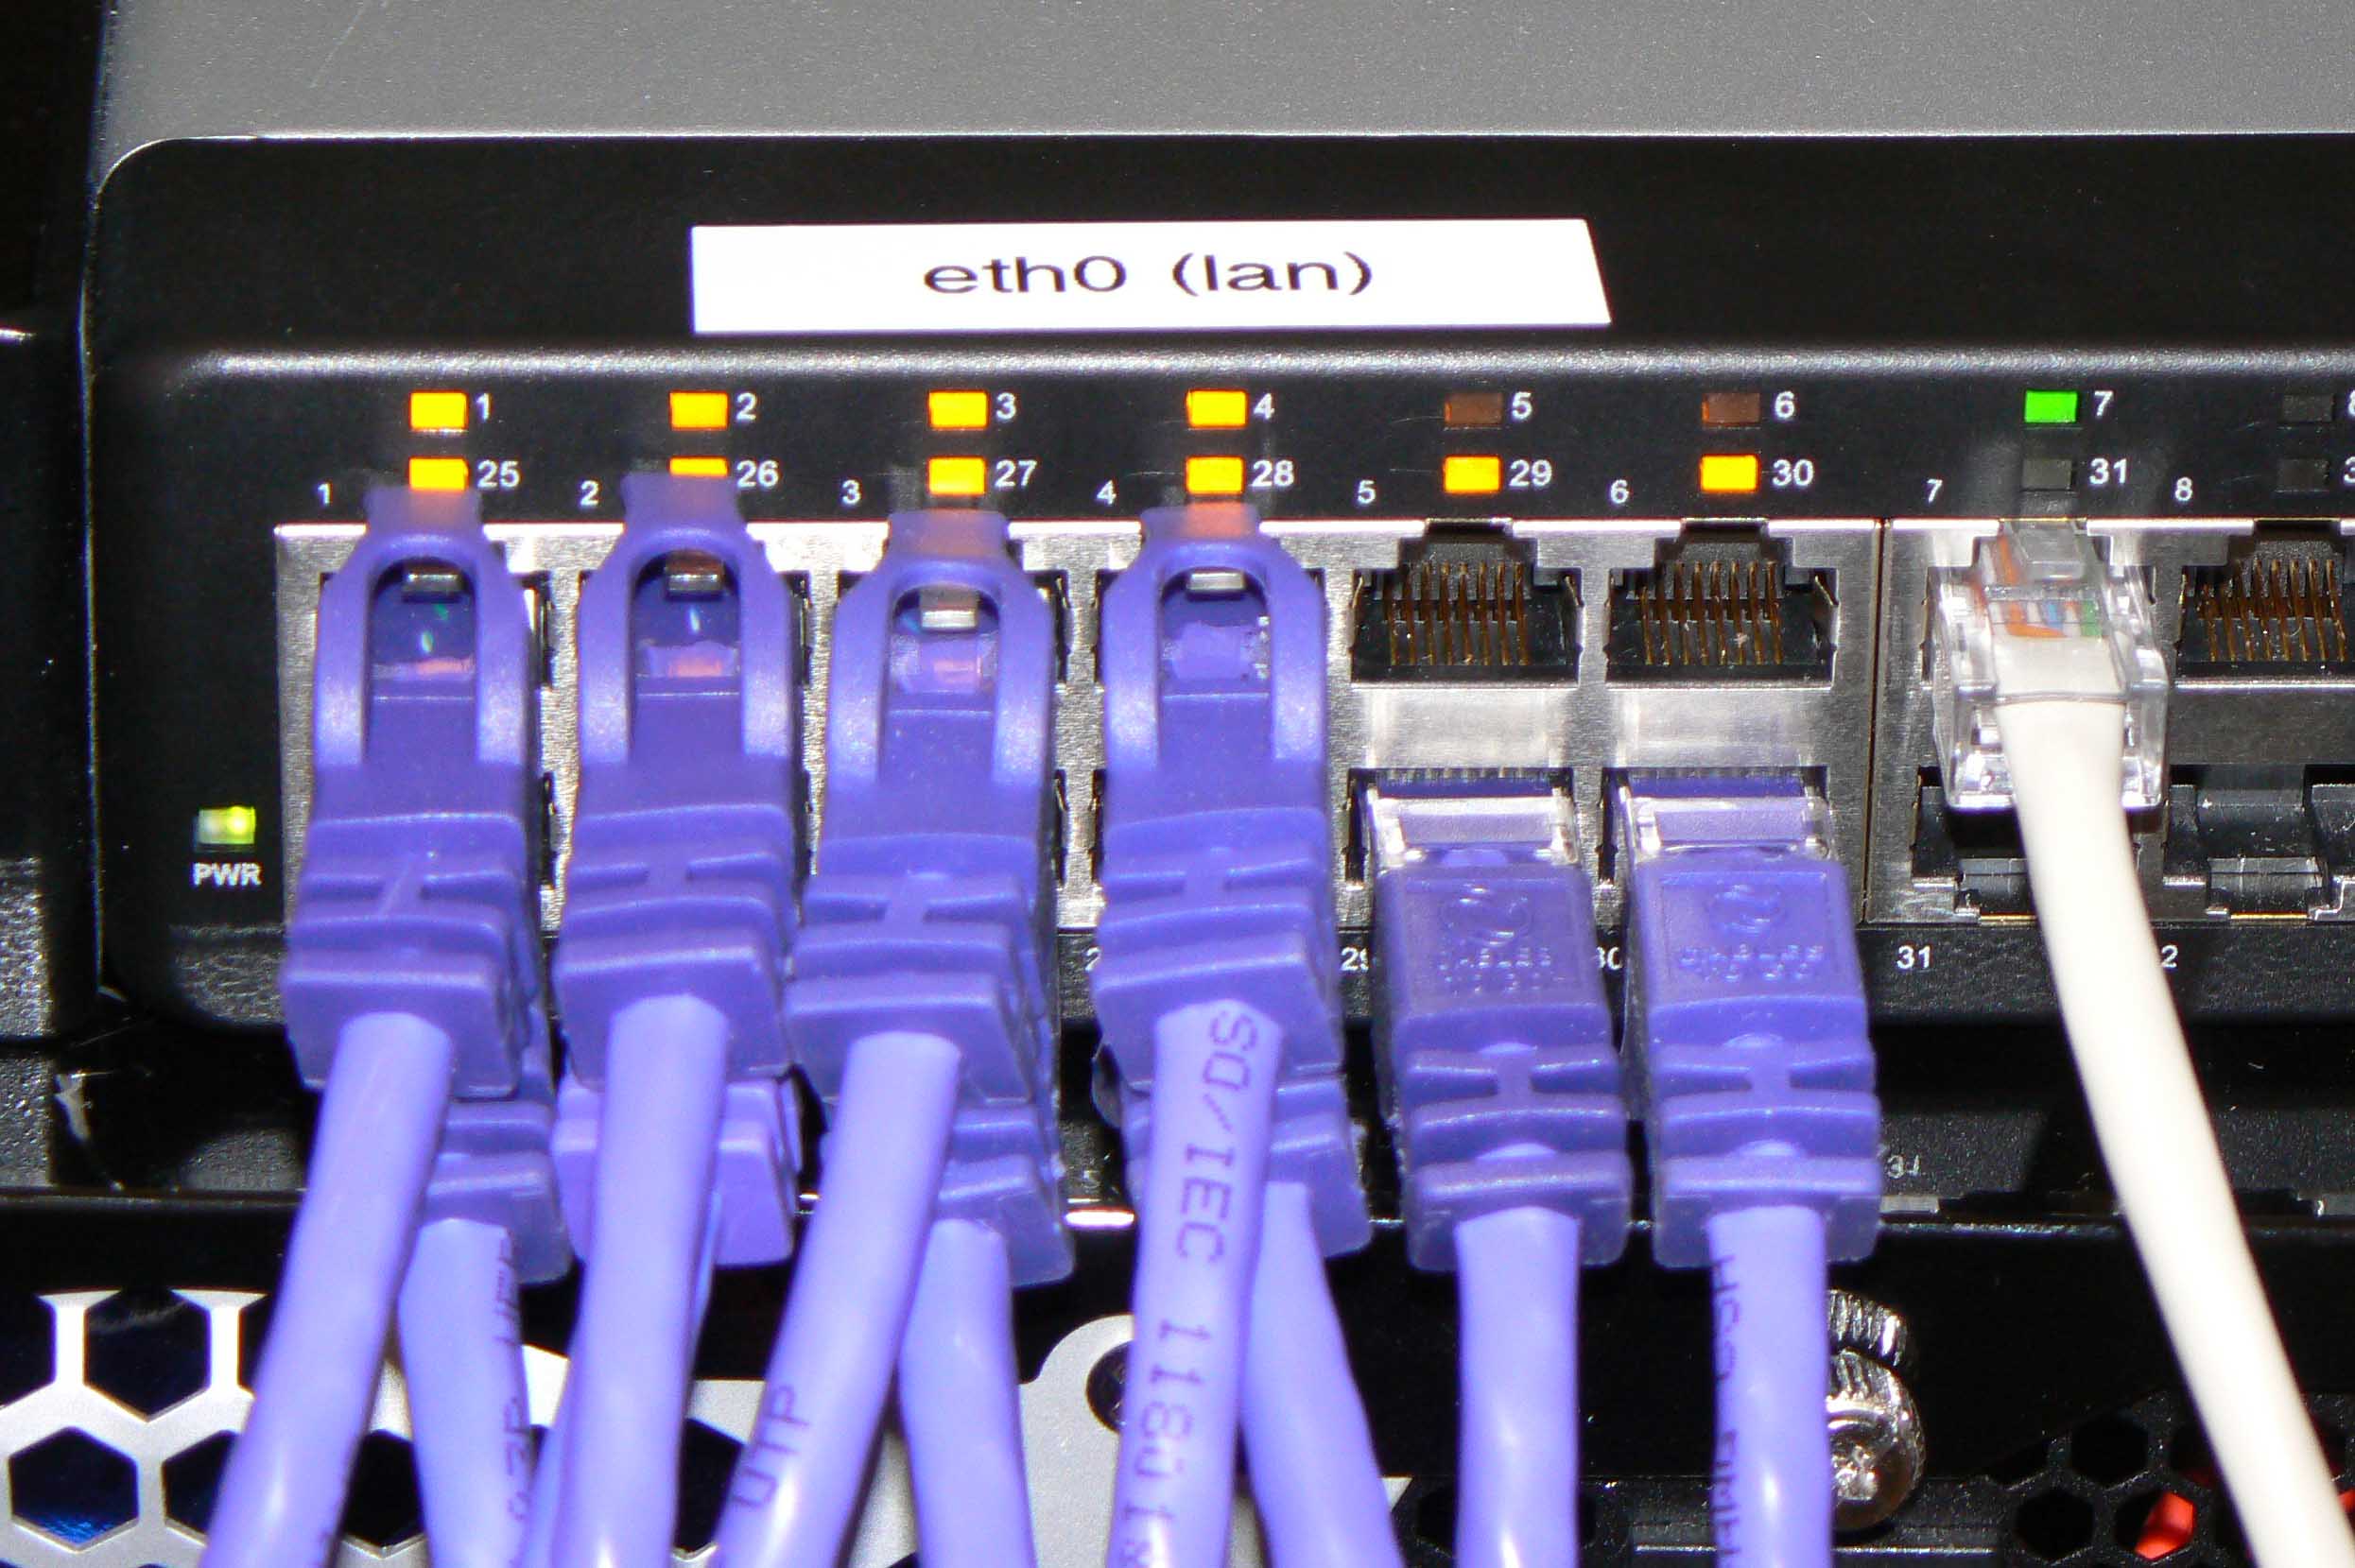 Dunwoody GA Professional Onsite Voice & Data Network Cabling Services